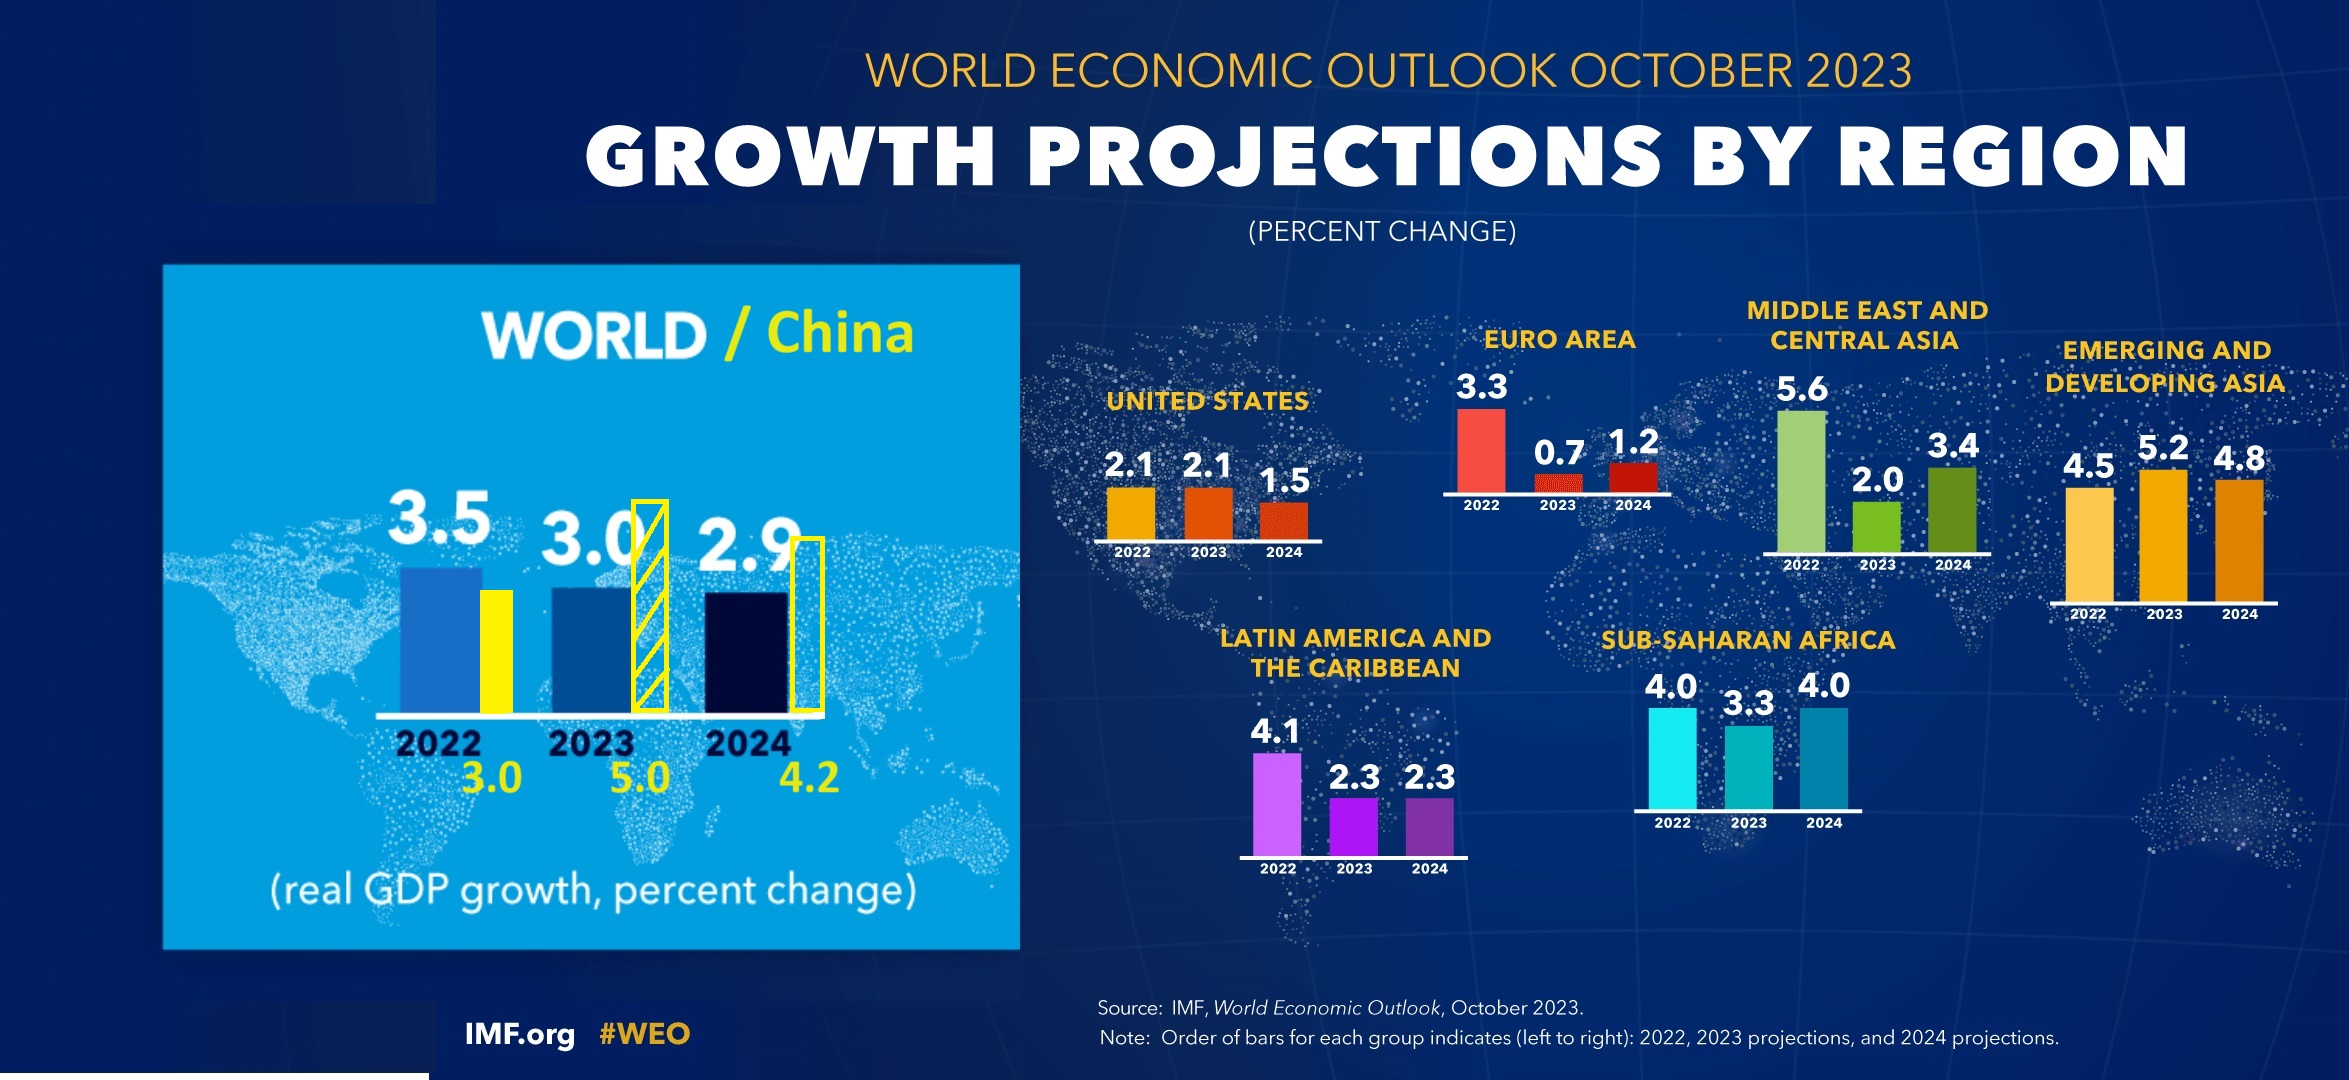 Photo: How China's economy is growing against the backdrop of the global and various regional economies